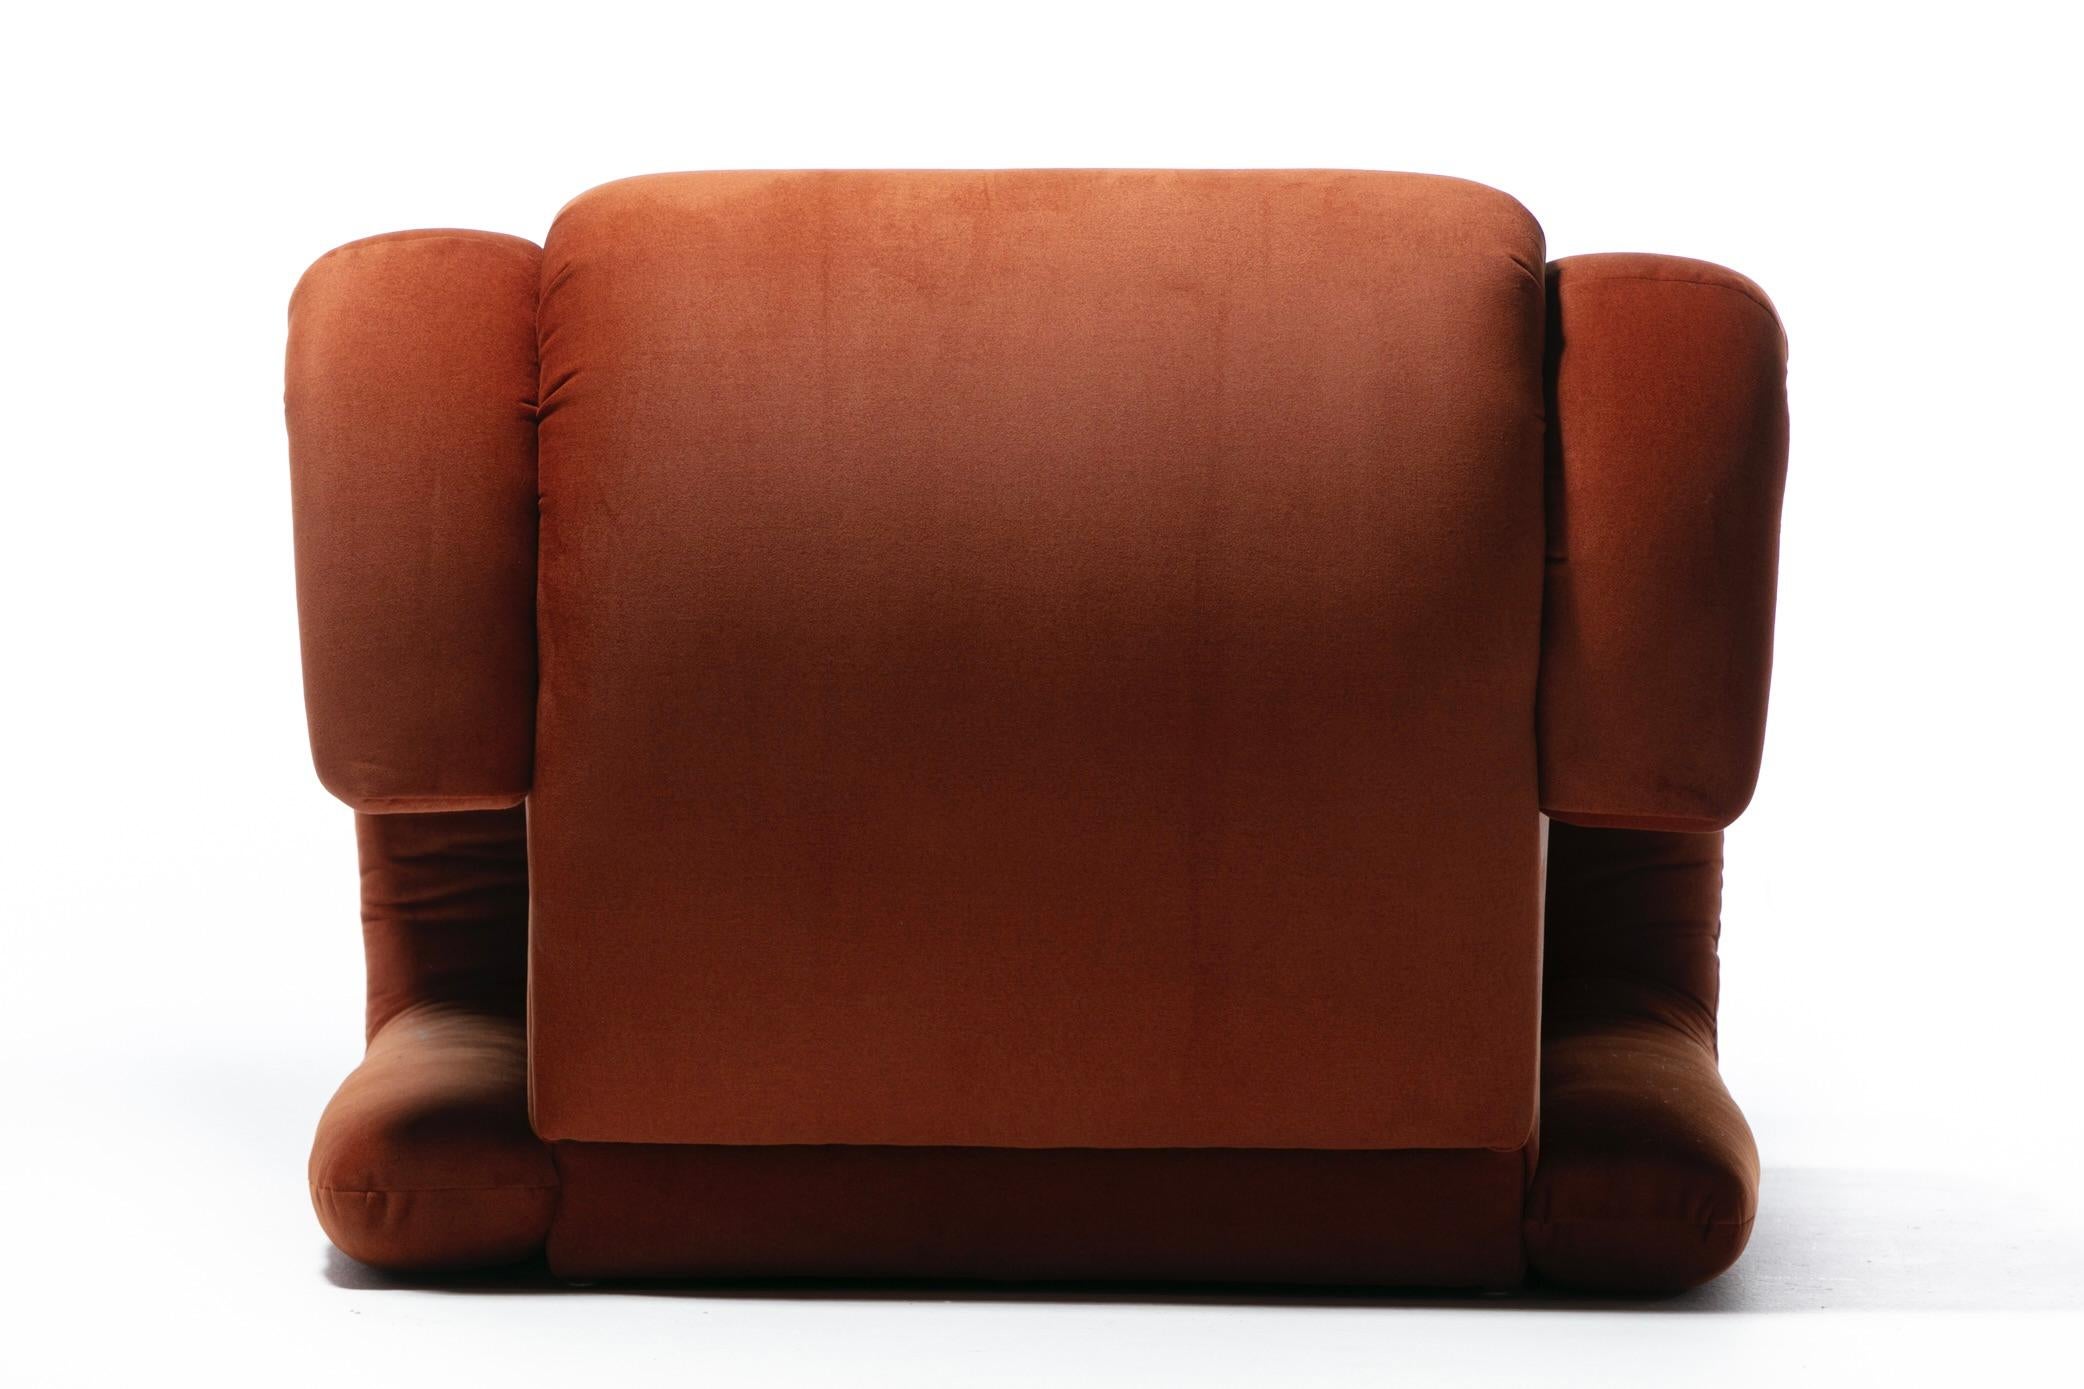 Monumental Post Modern Pair of Weiman Lounge Chairs in Marmalade Orange Fabric For Sale 4